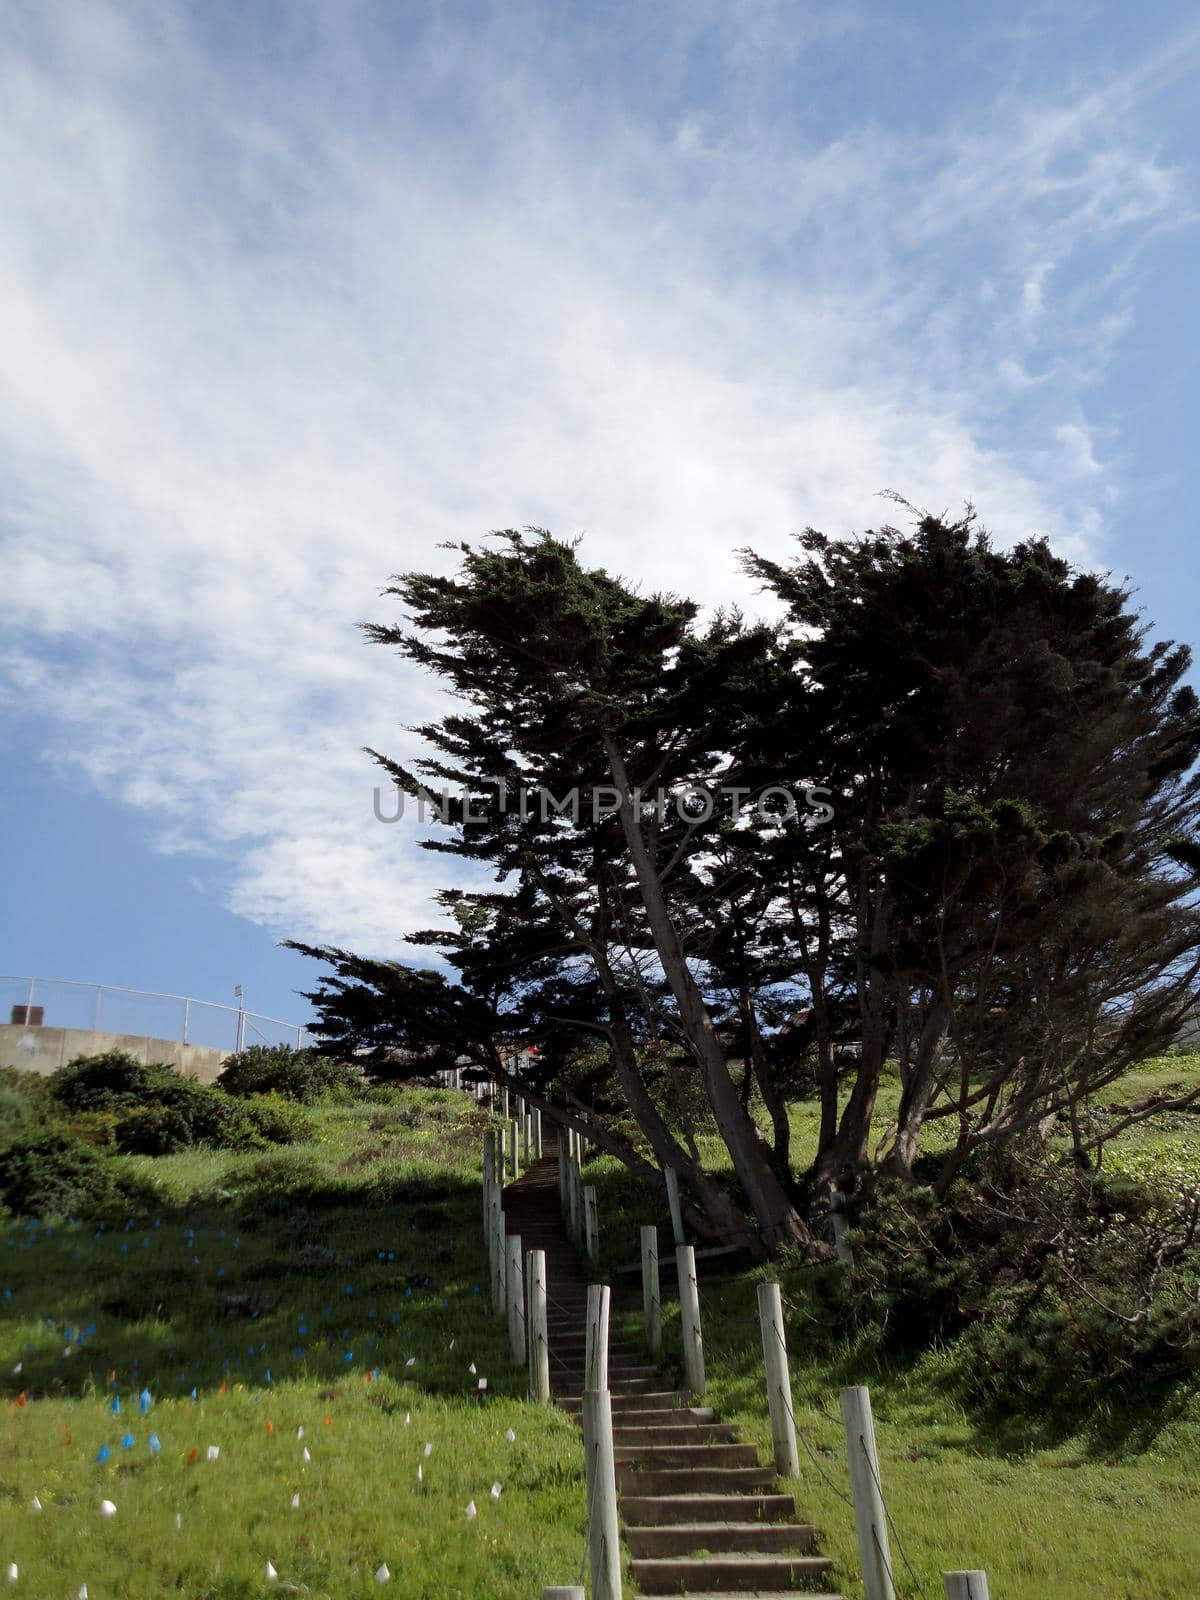 Hillside Stairs leading upwards with tree along path at China Beach in San Francisco.